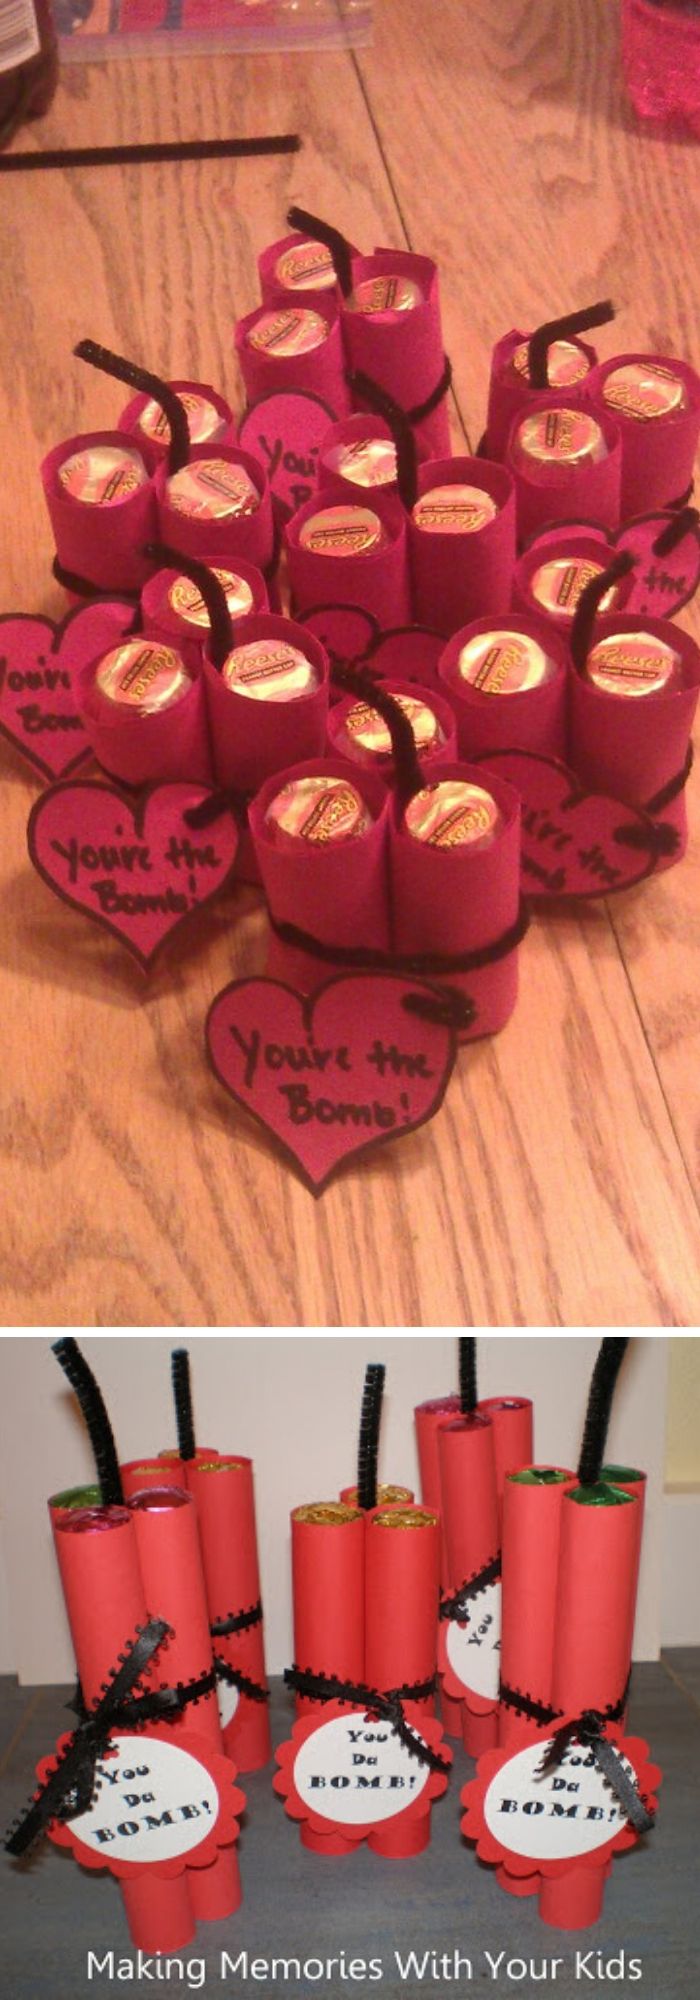 You're the bomb - Valentine's Day Crafts for kids